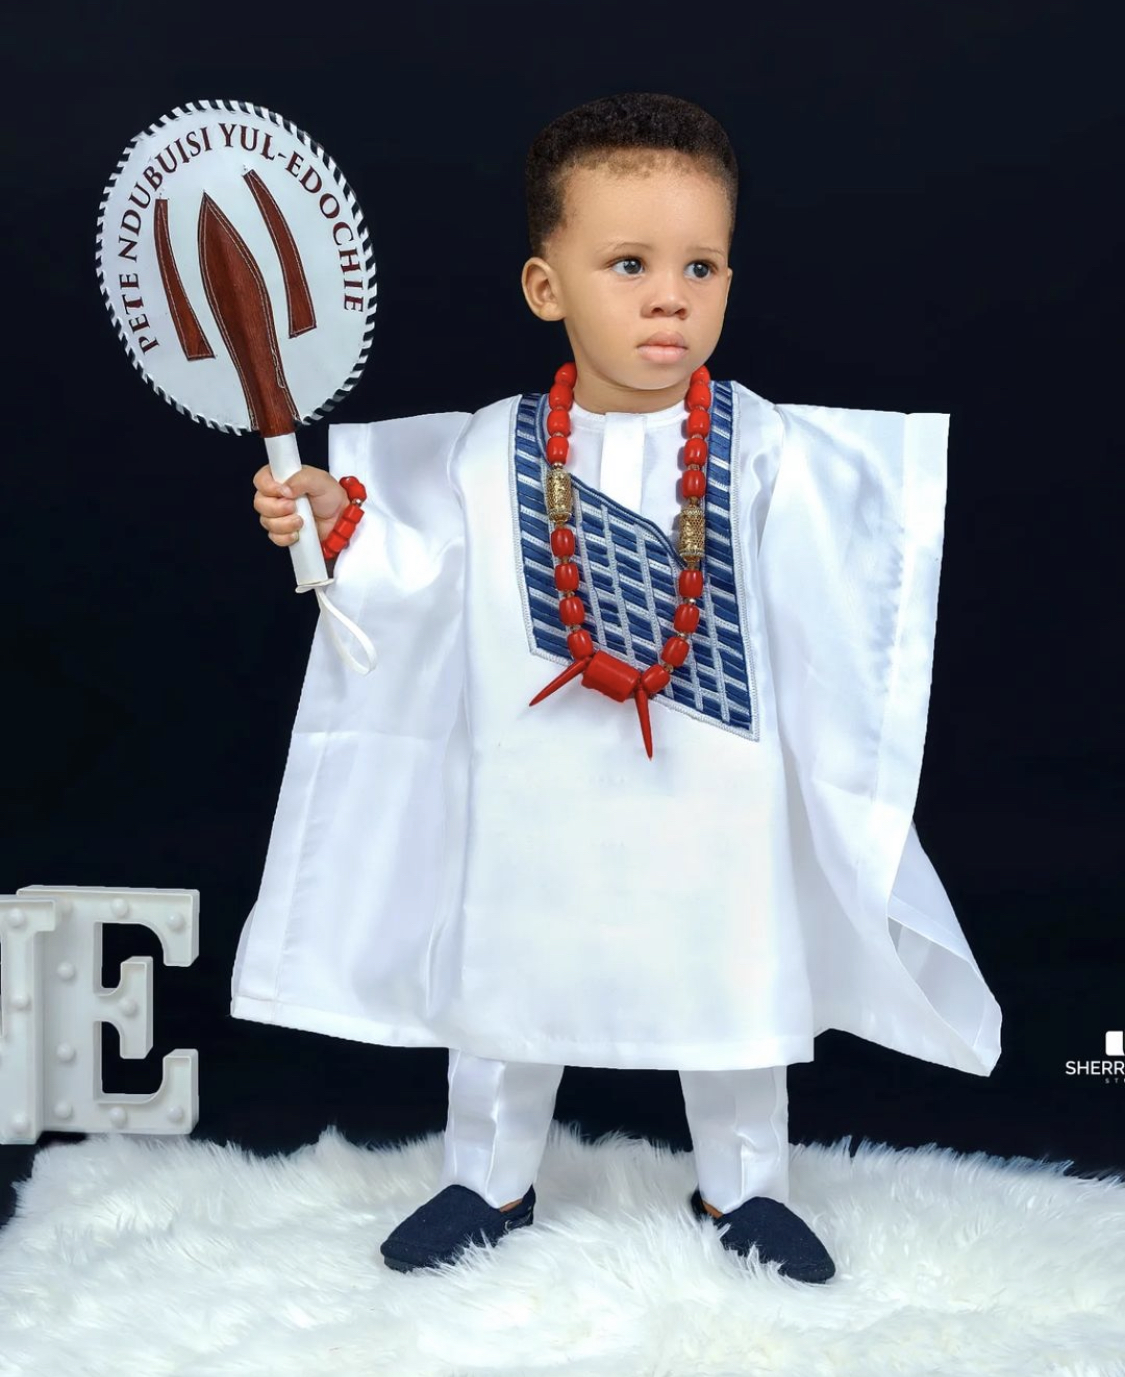 Actor Yul Edochie finally unveils son with second wife Judy Austin as he turns 1 year old [photos]